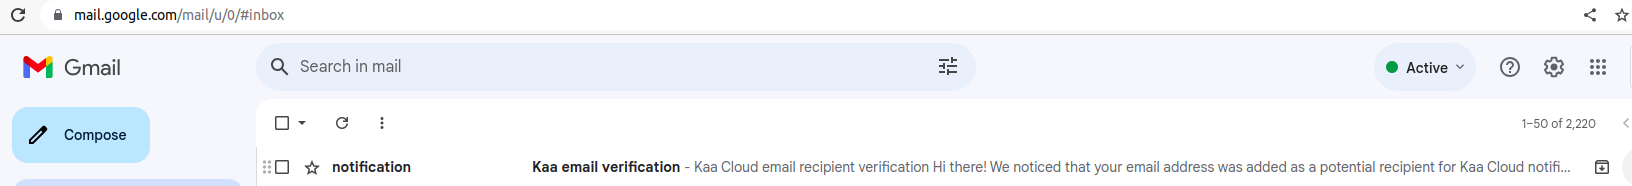 mailbox verification email.png